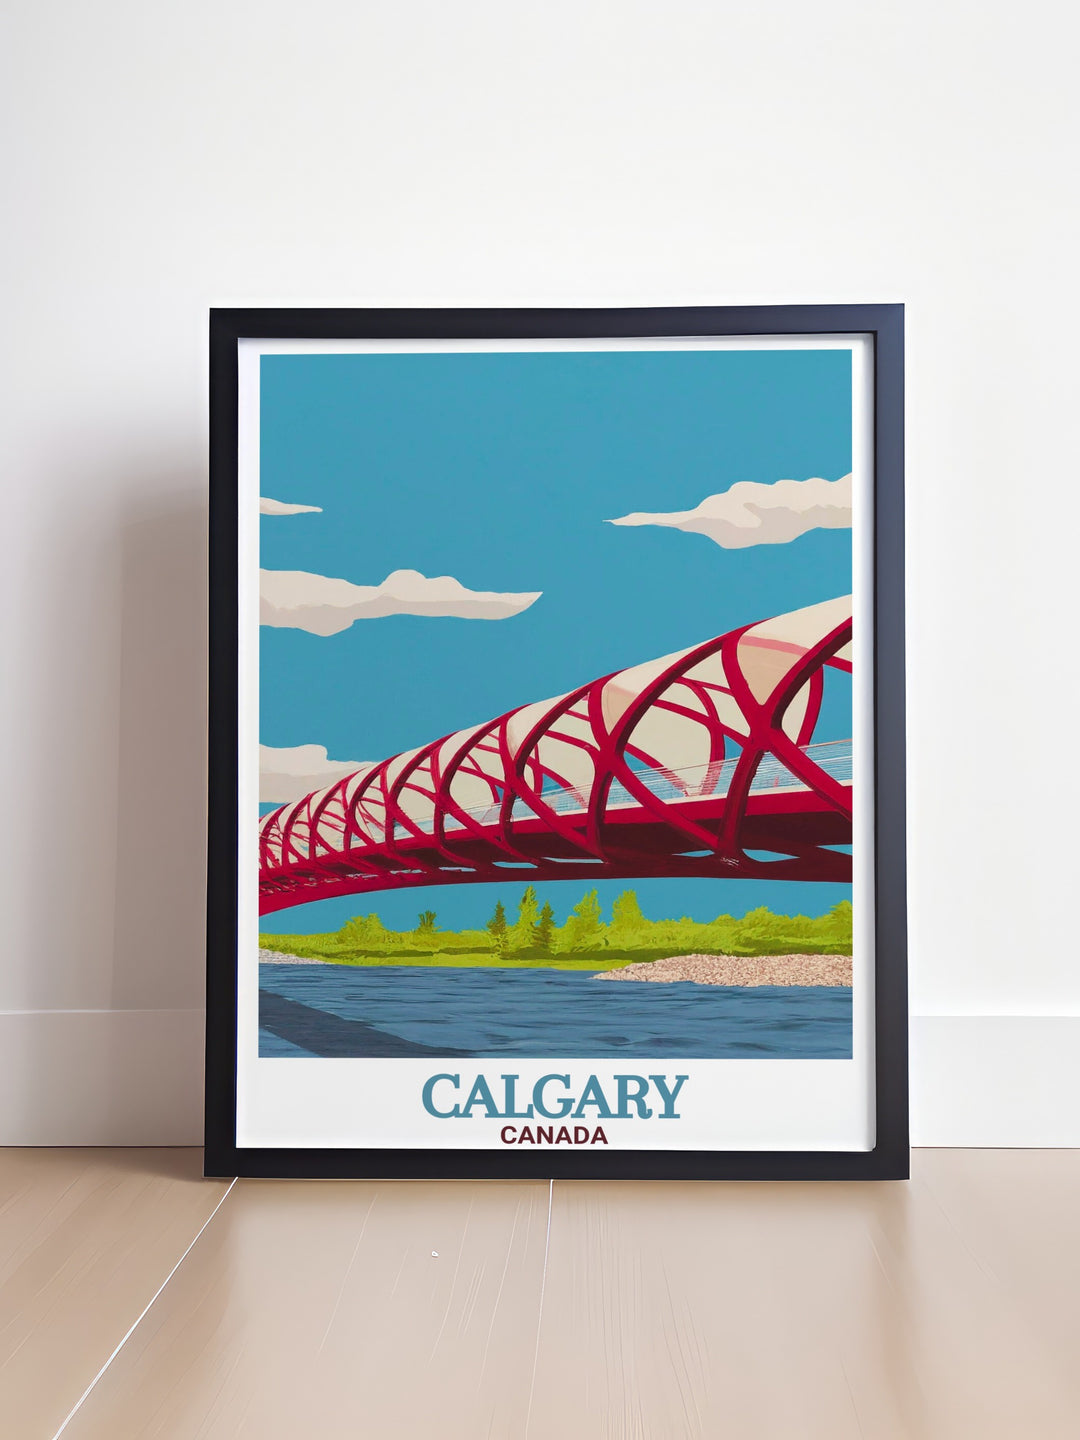 Enhance your home decor with a Peace Bridge print featuring the architectural marvel of Calgary. This Canada travel print adds sophistication and style to any room making it a perfect addition to your wall art collection.